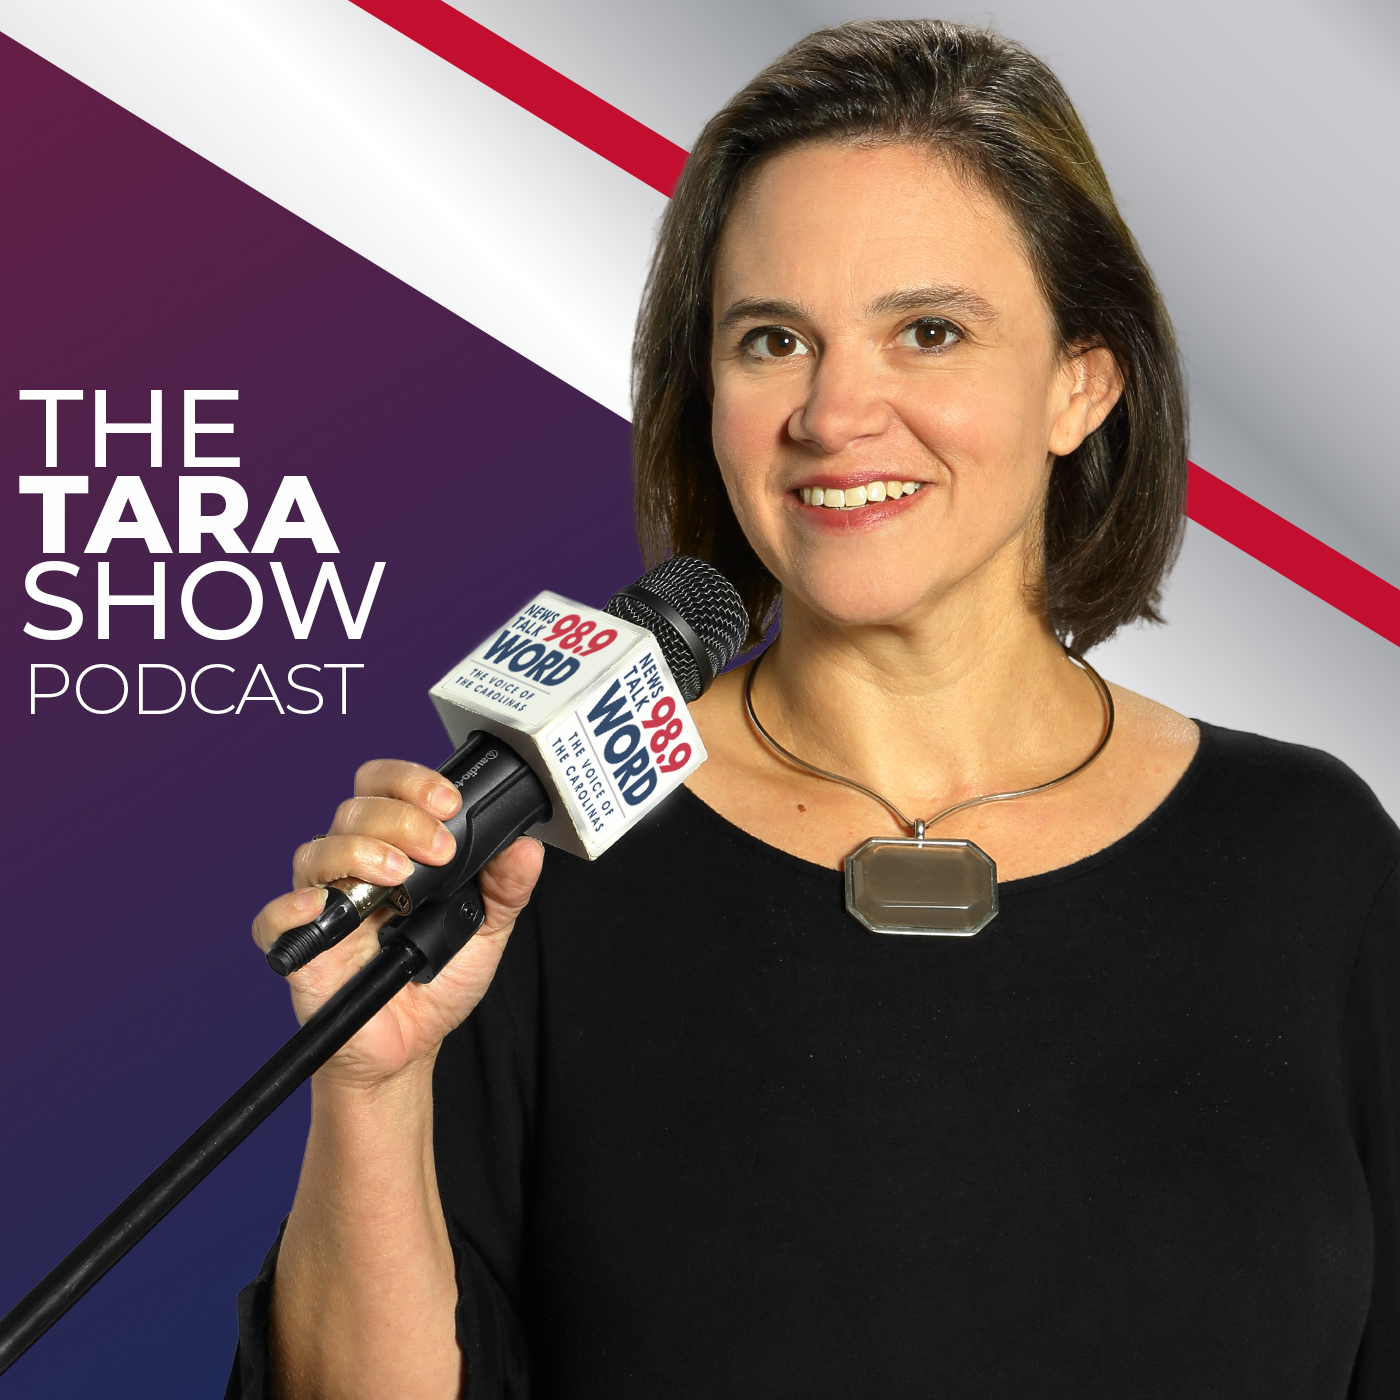 Hour 2: The Tara Show - “Tara’s Analysis of the Fox Carolina Debate” “The Future of Conservative Politics” “Looking in to Biggs and Burns with Special Guest Brenda Stewart” “Greenville County Council Decrees New Gas Tax” 